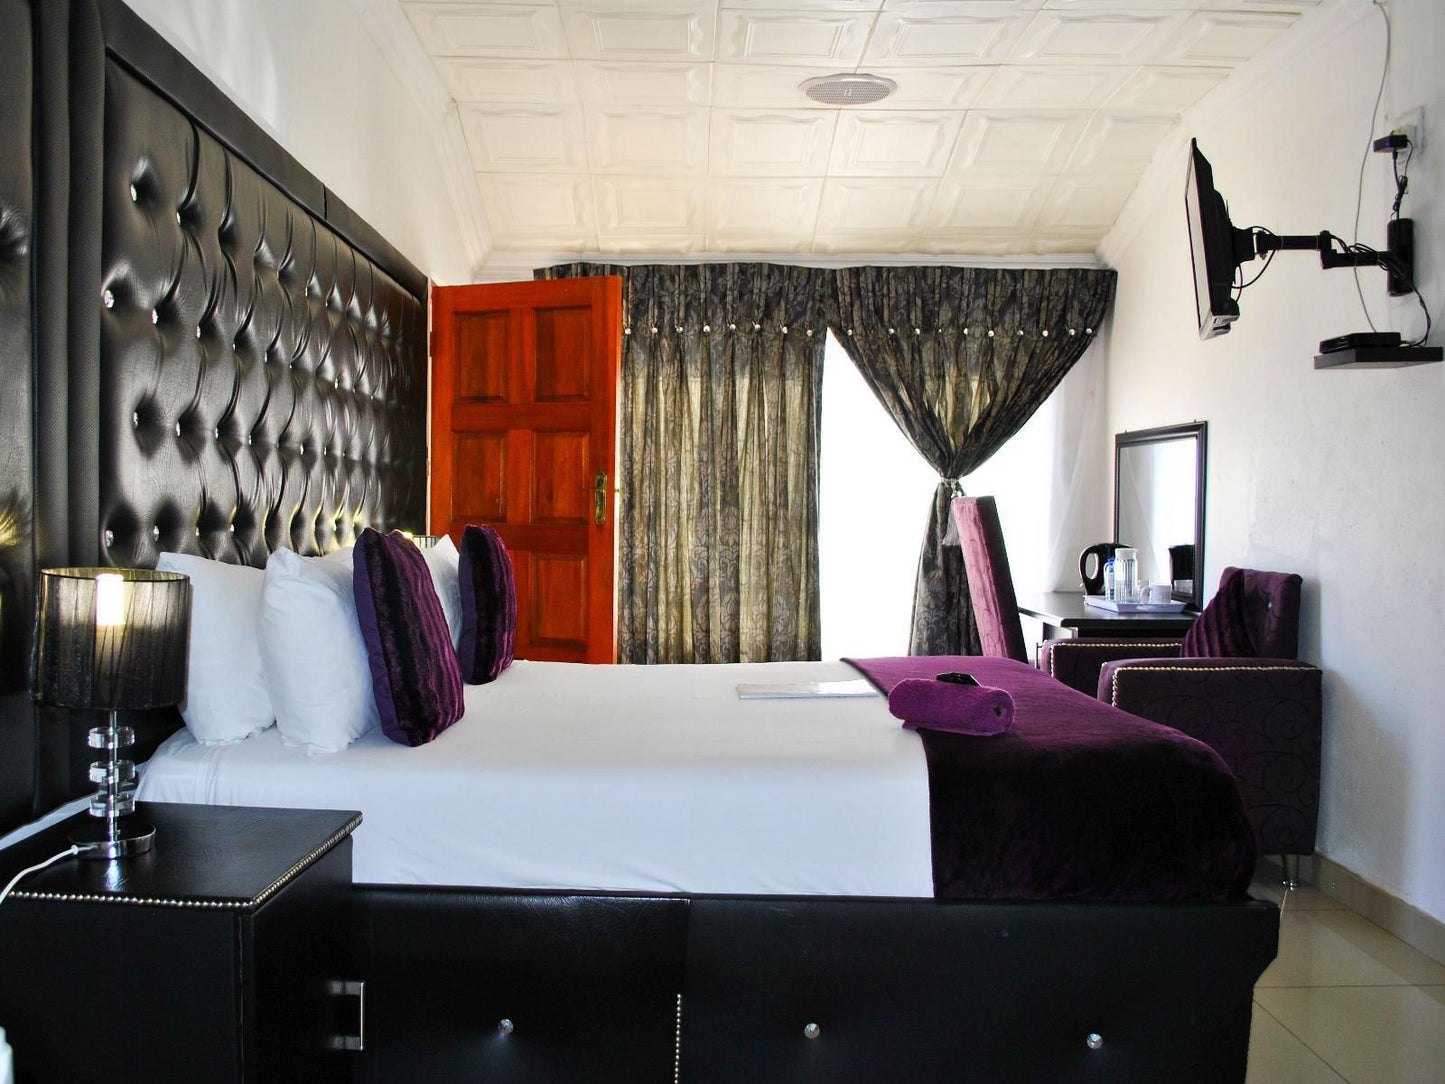 Lapologa Kruger Phalaborwa Limpopo Province South Africa Bedroom